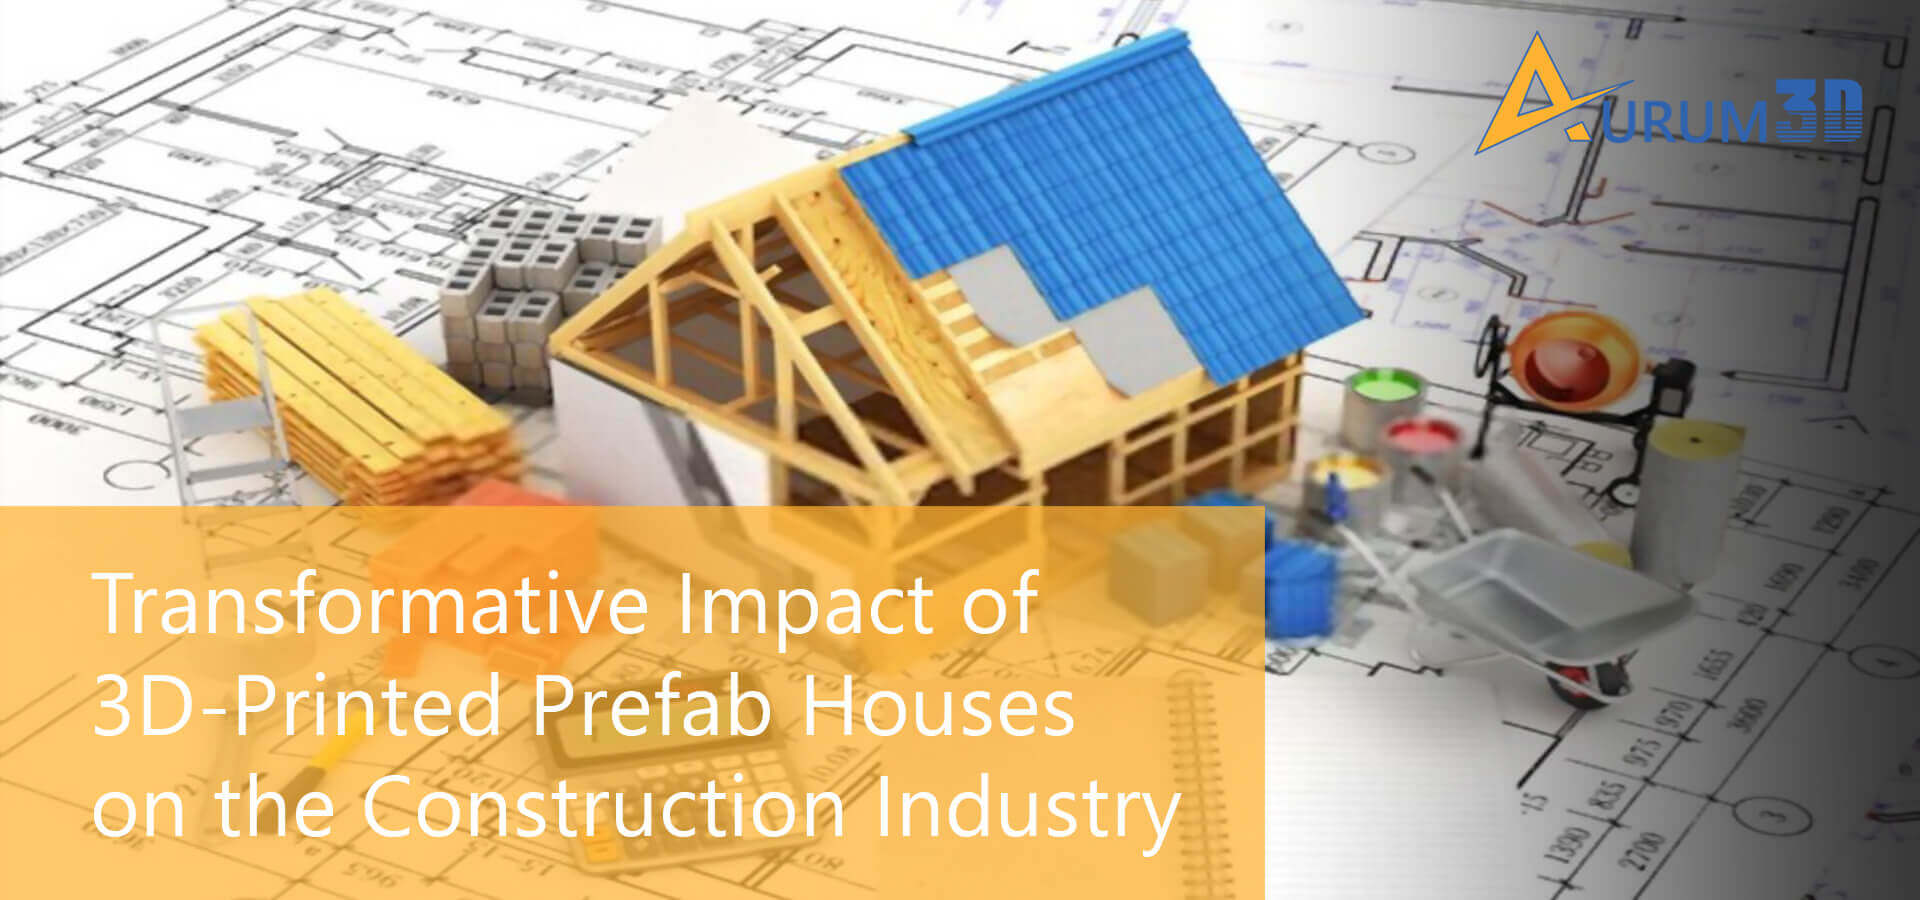 Transformative Impact of 3D-Printed Prefab Houses on the Construction Industry